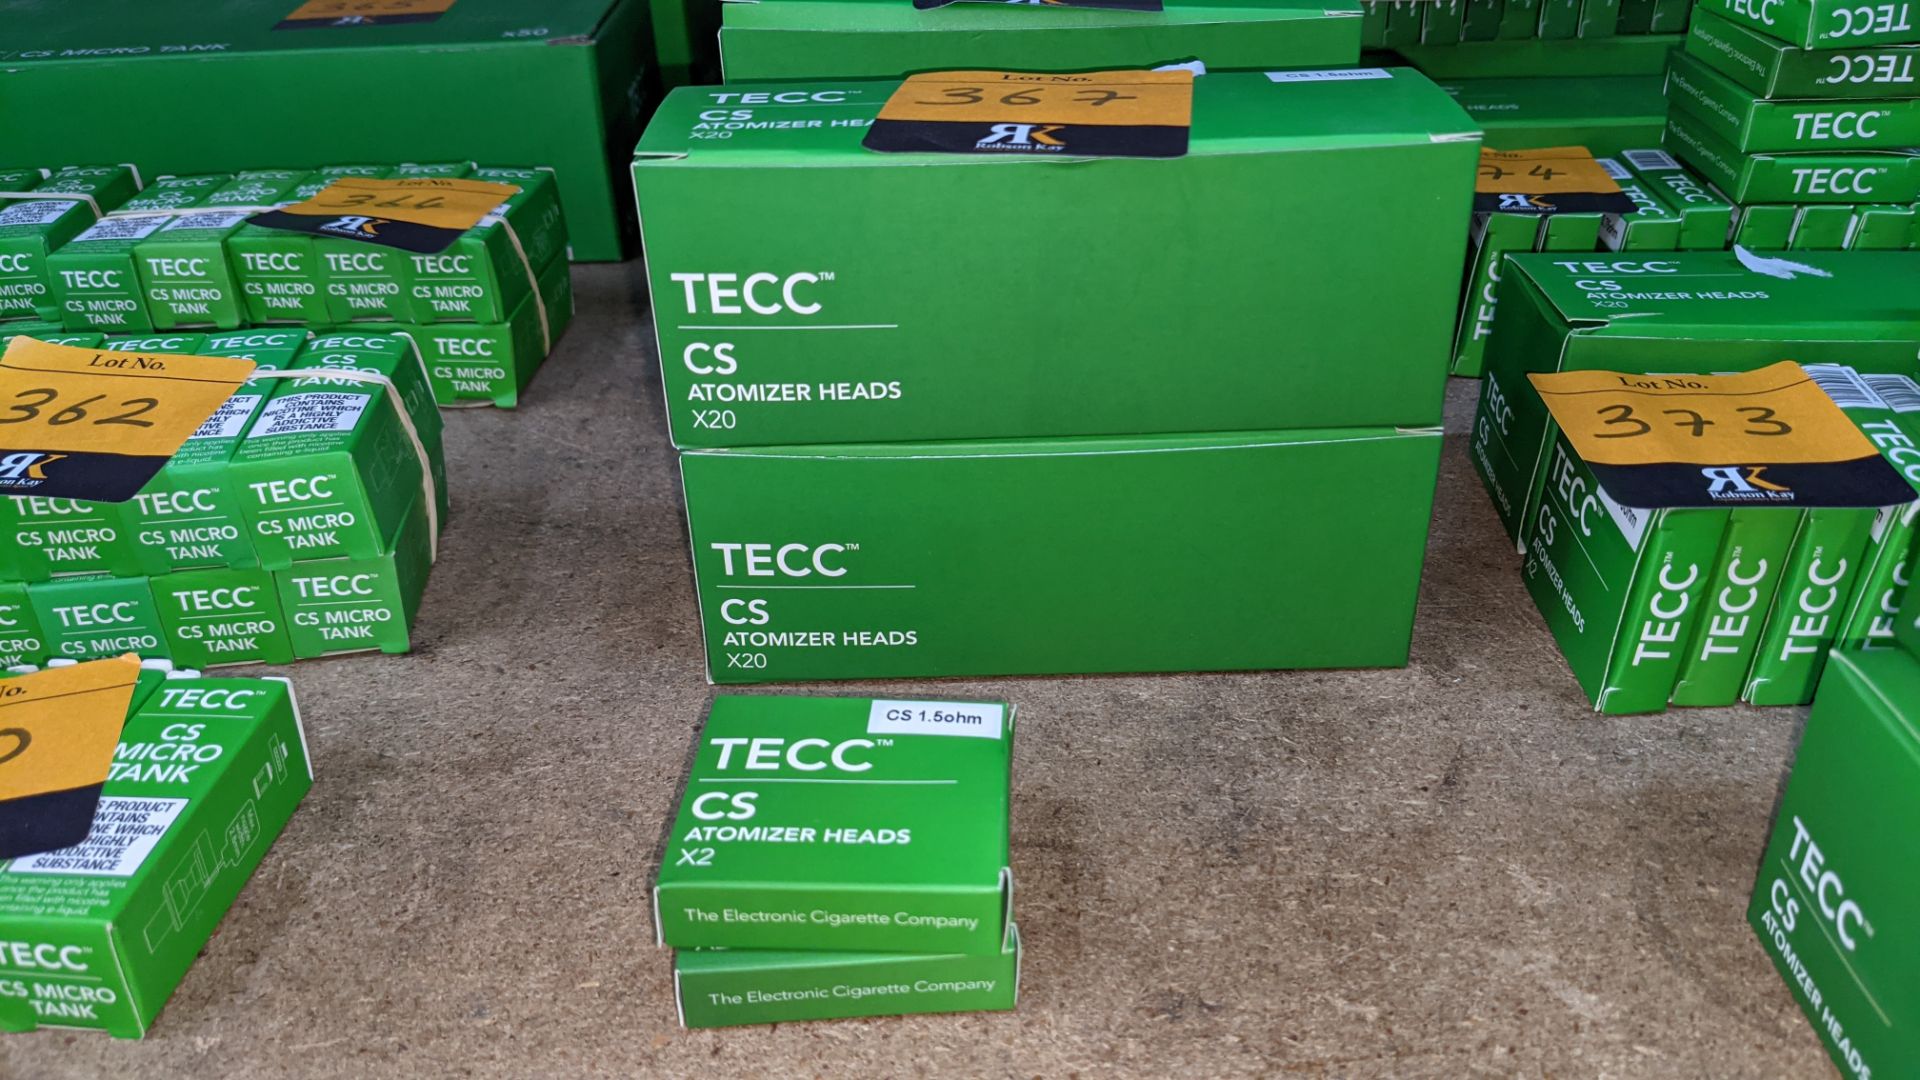 22 off TECC CS atomizer head twin packs (22 packs each containing 2 heads). 1.5ohm - Image 2 of 4